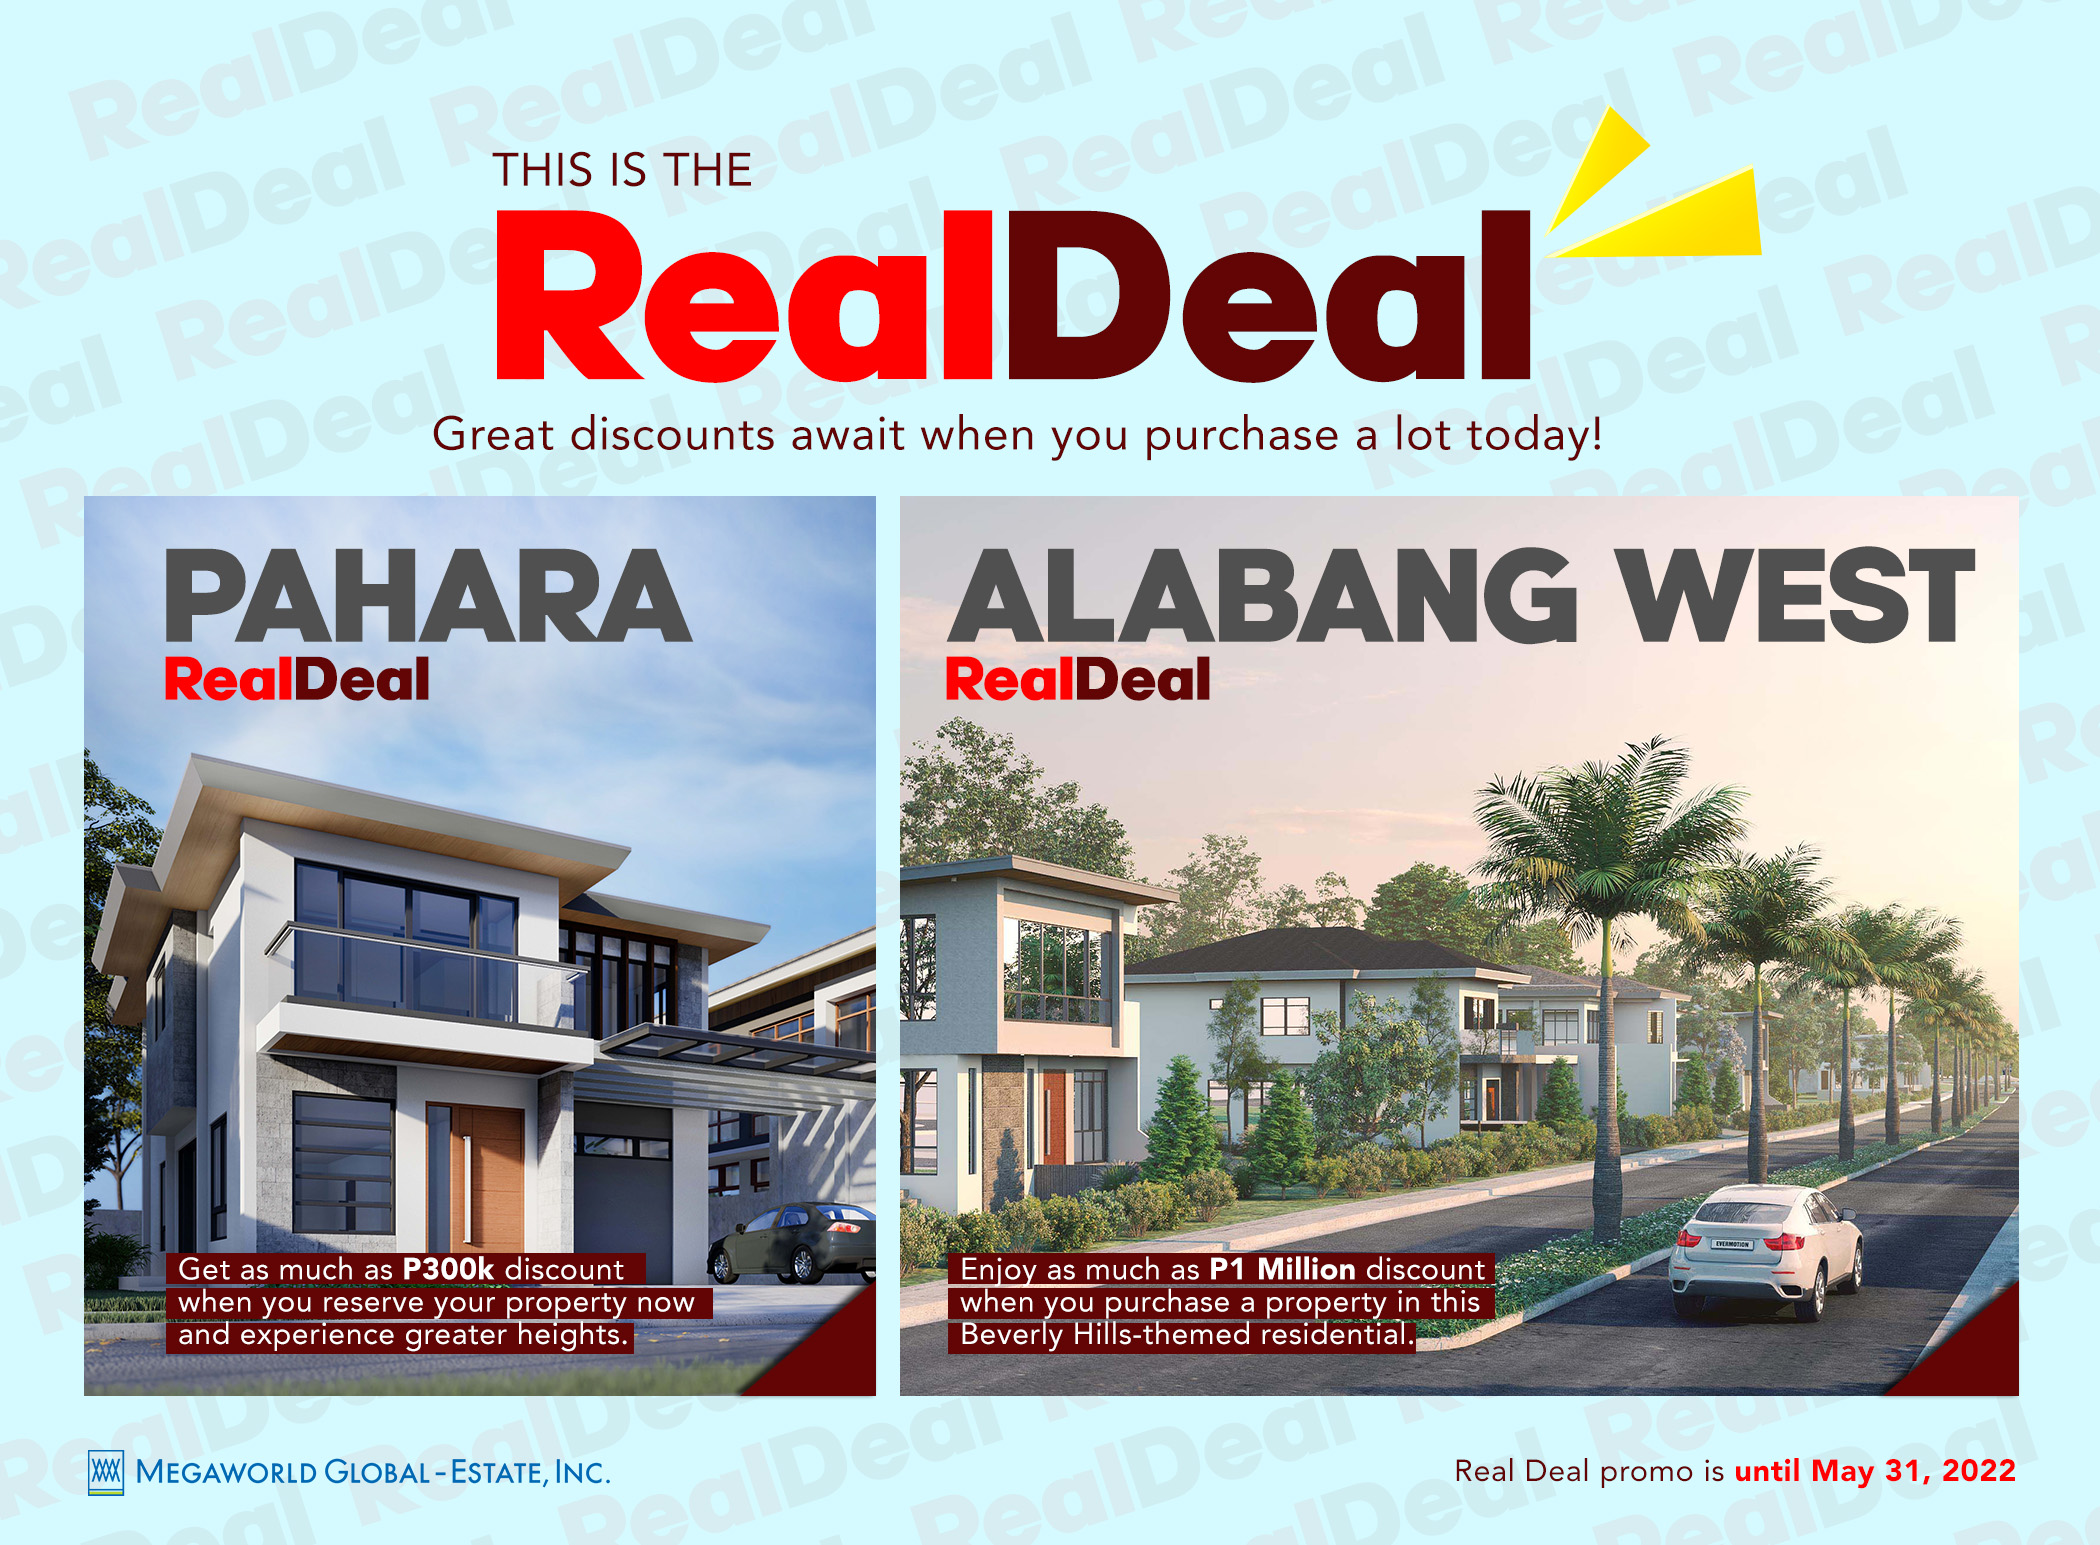 aabang west real deal promo